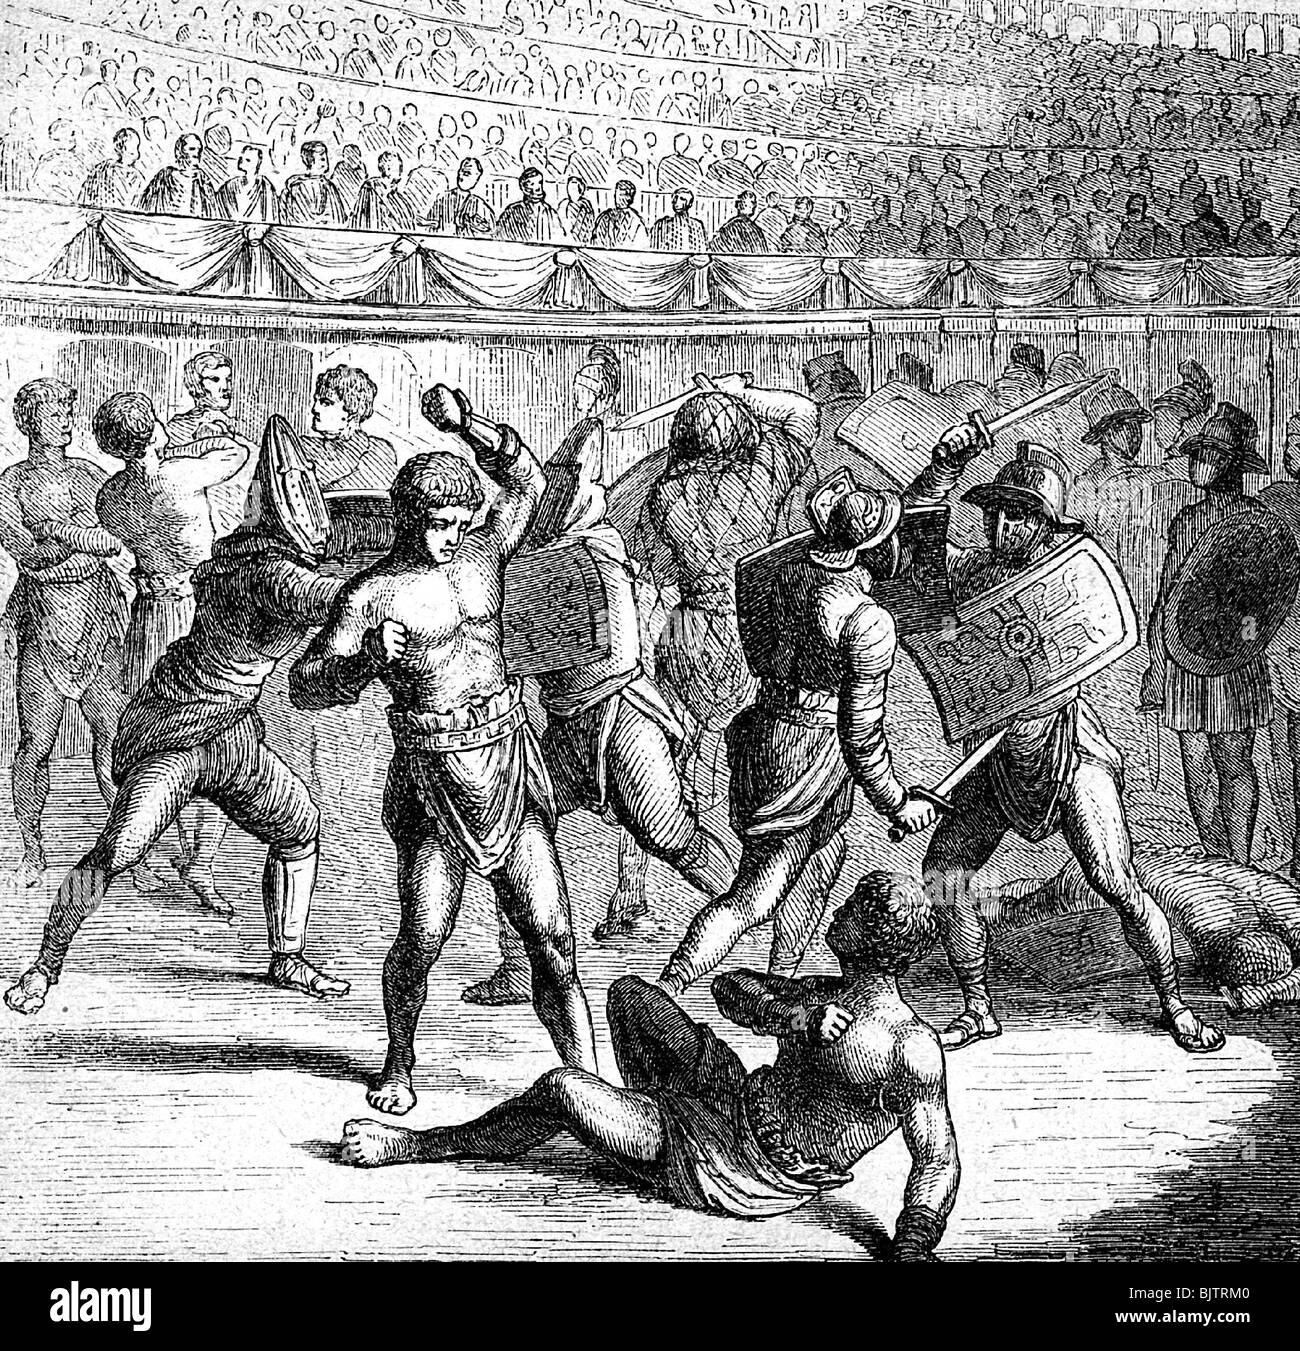 ancient world, Roman Empire, gladiators fighting in arena, wood engraving, 19th century, historic, historical, fight, combat, sports, sport, ancient world, people, Stock Photo